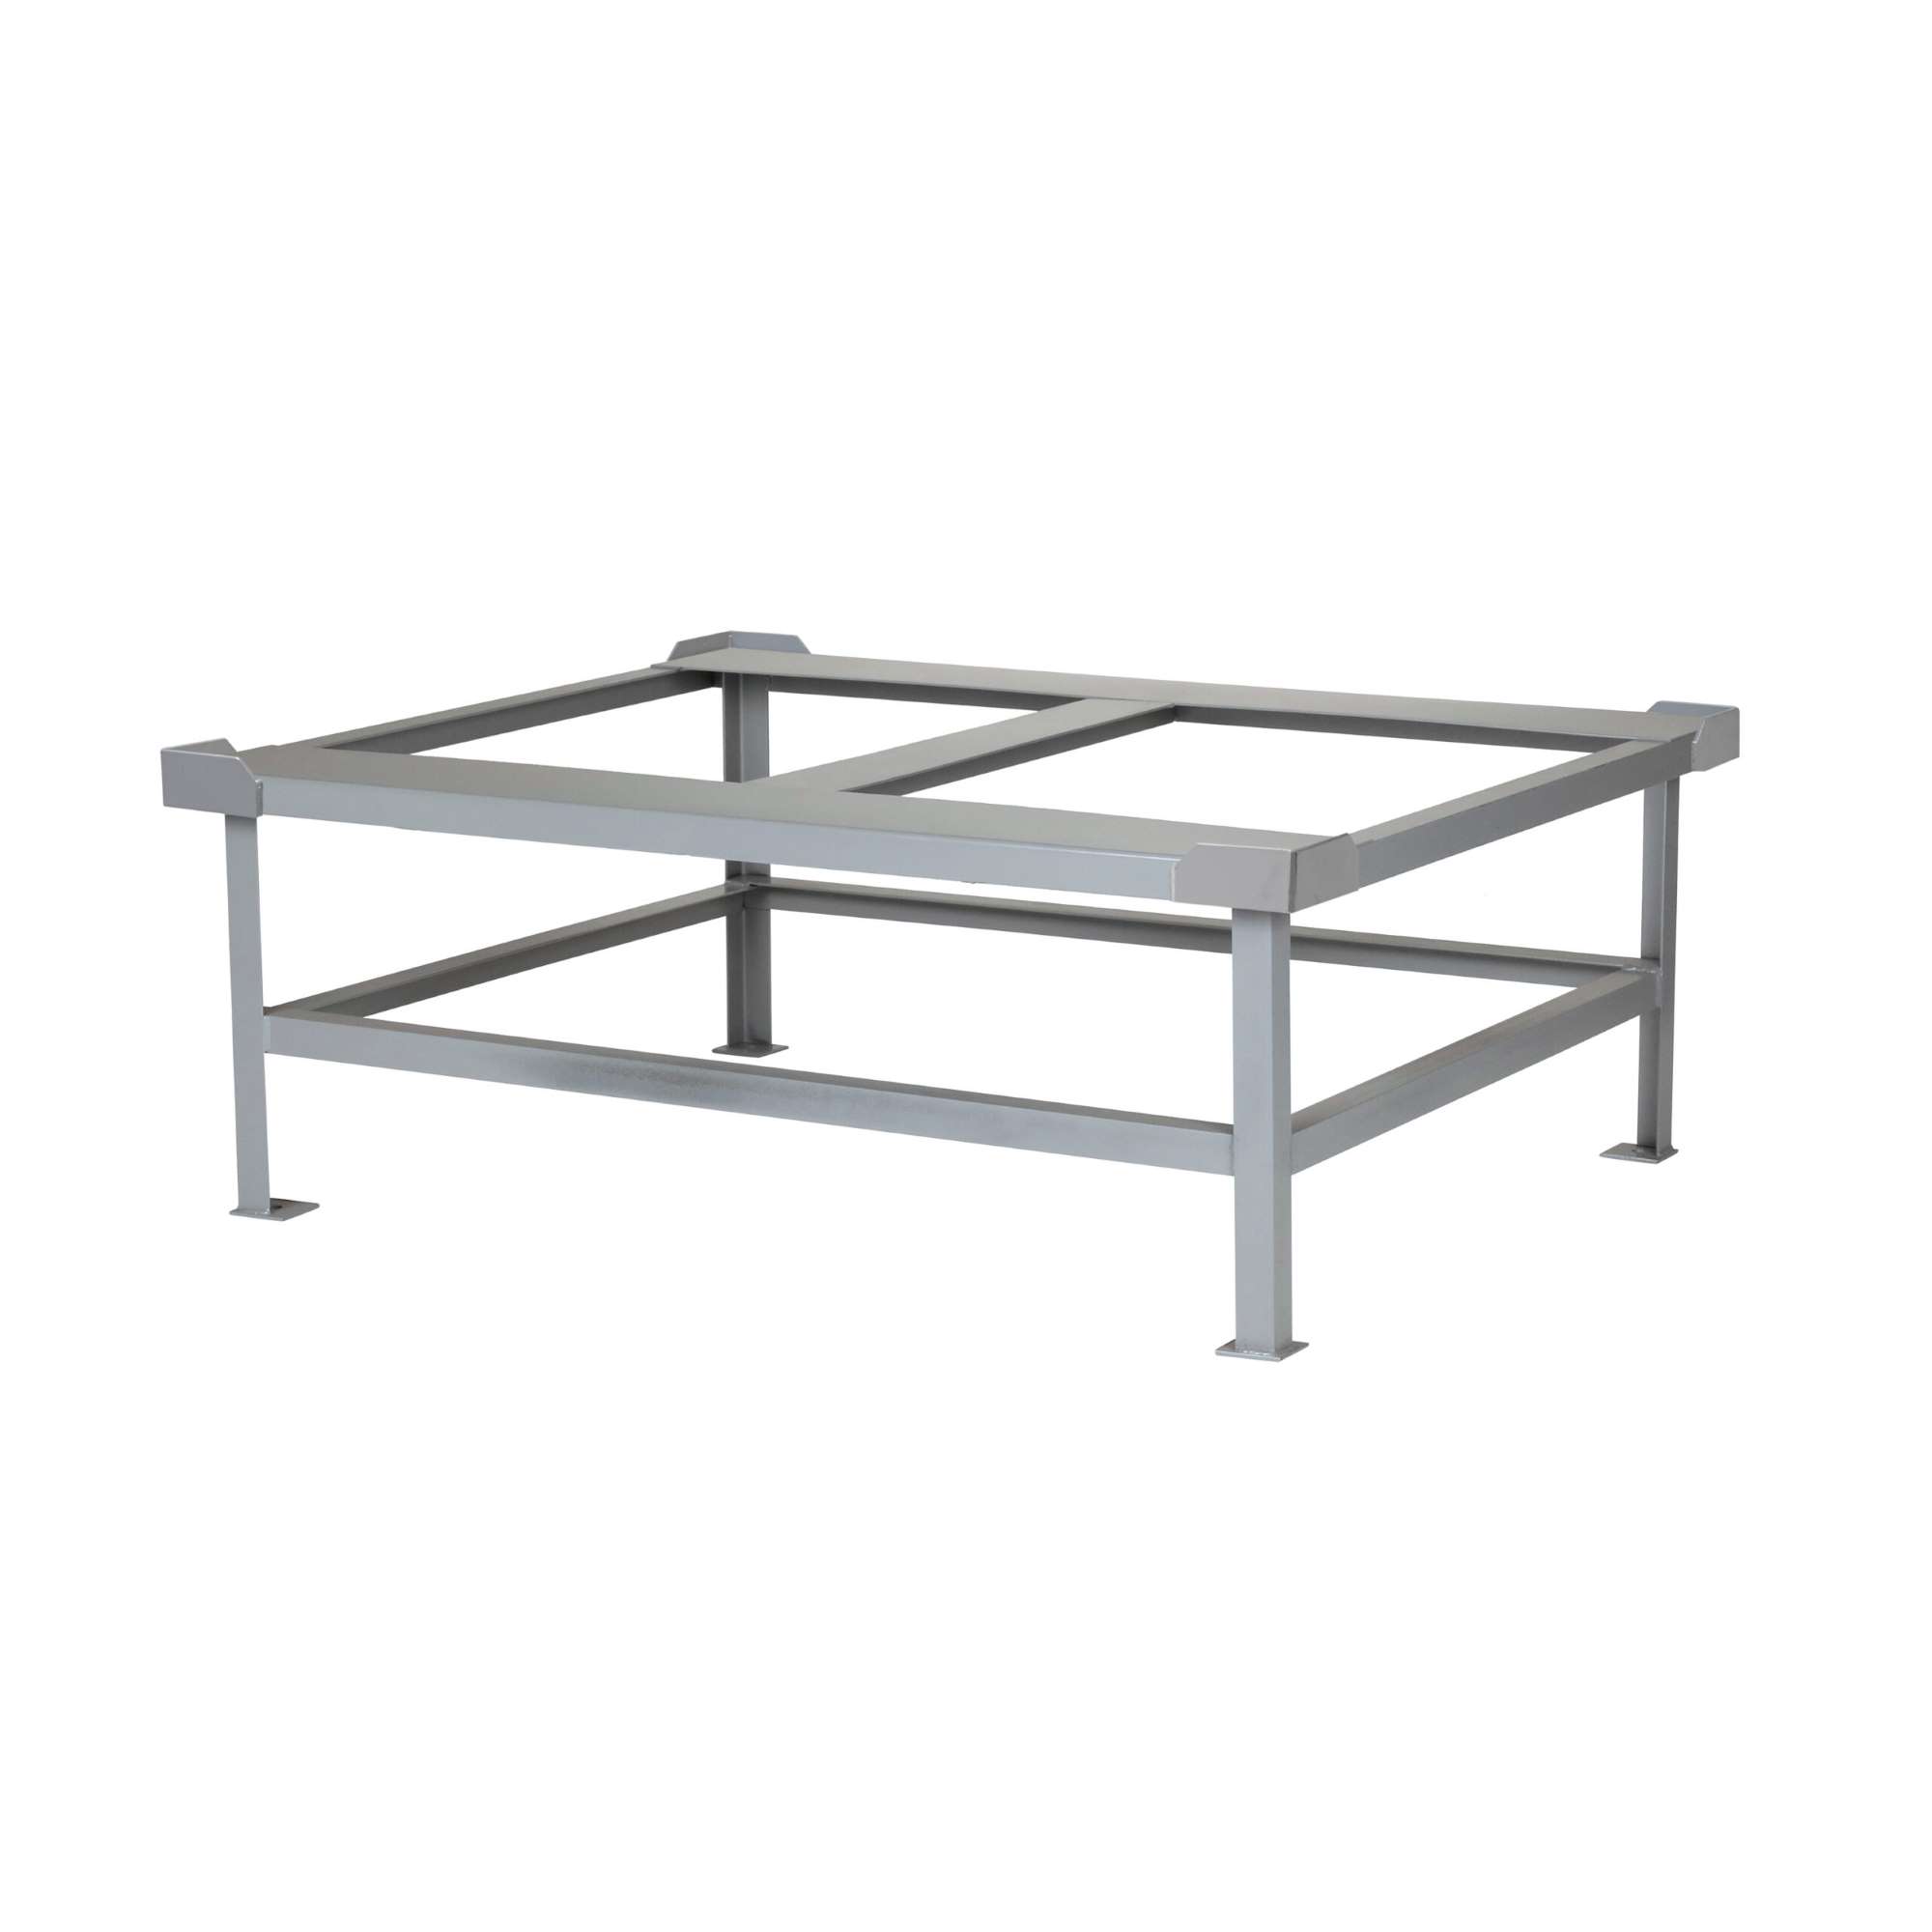 Little Giant All Welded Steel Pallet Stand, 18" high, Ergonomic, Low Profile, with Load Retainers